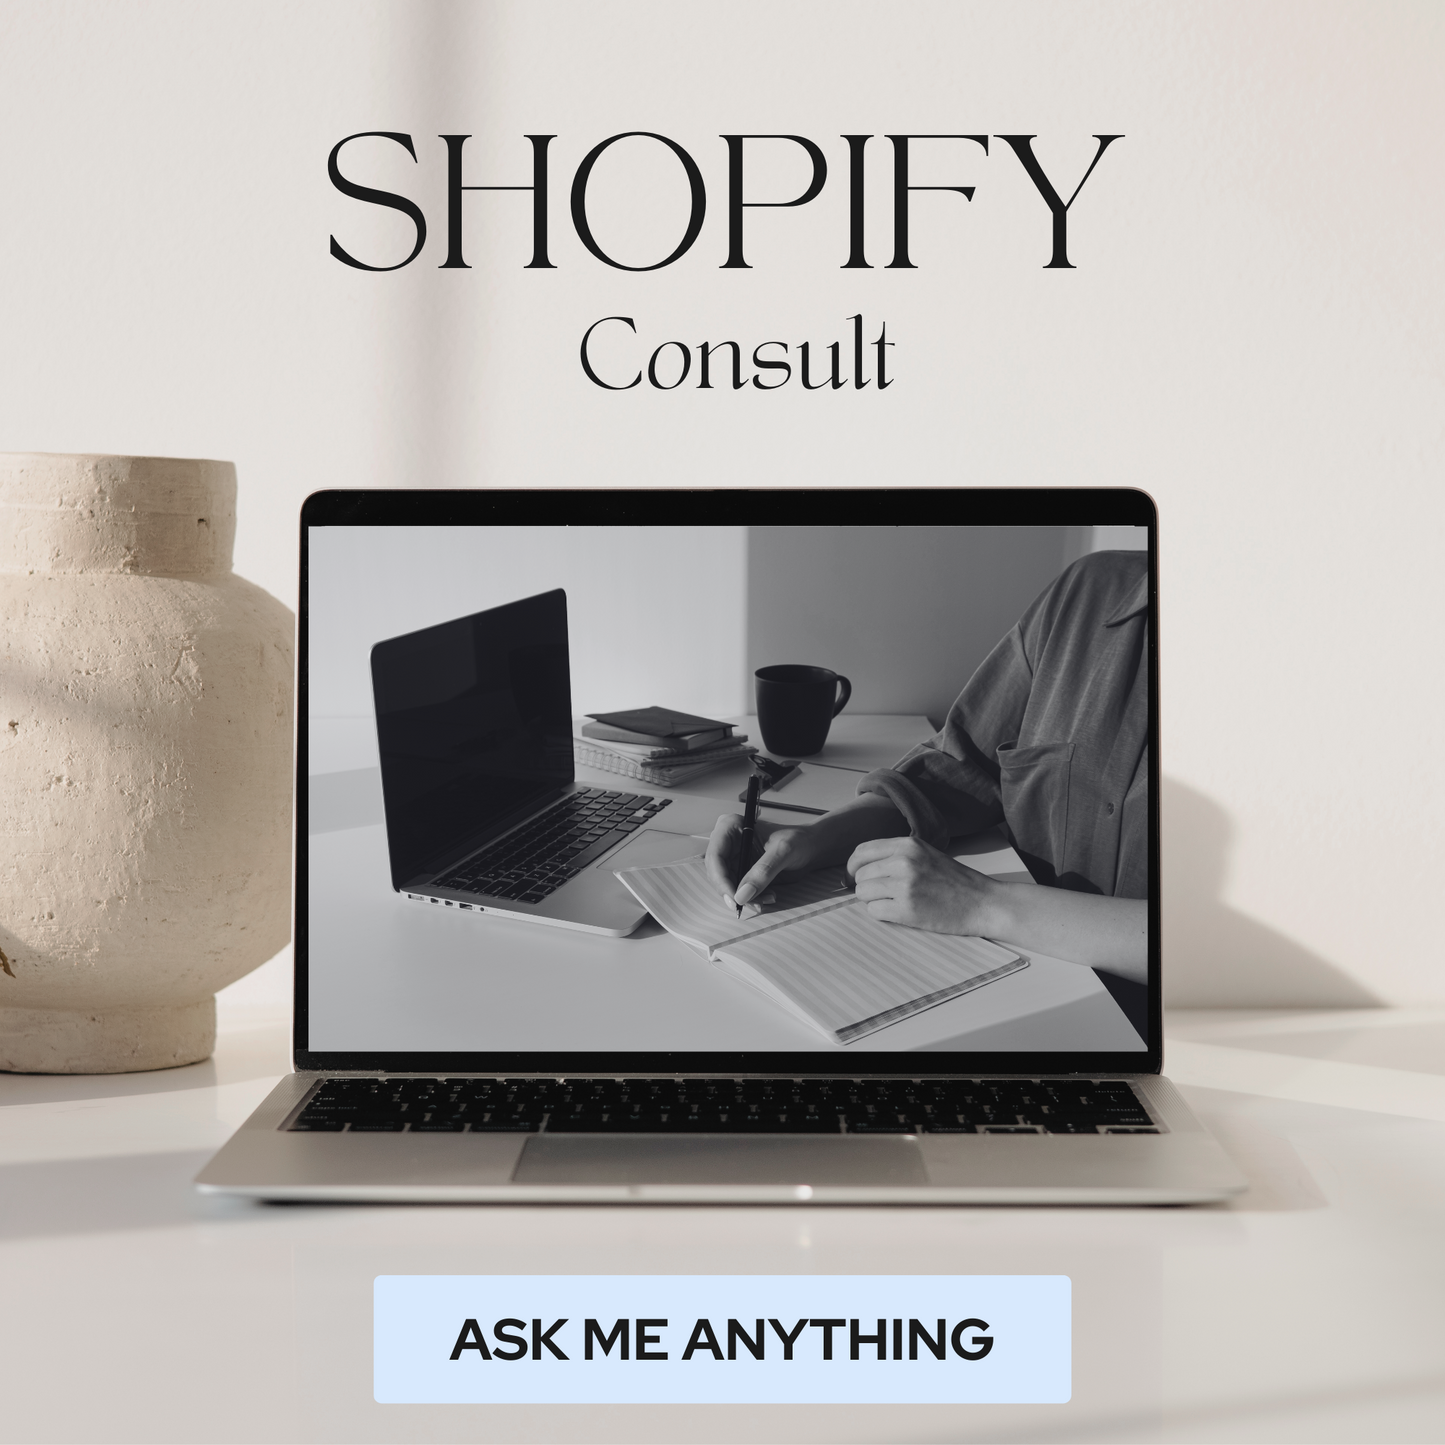 Shopify Consult